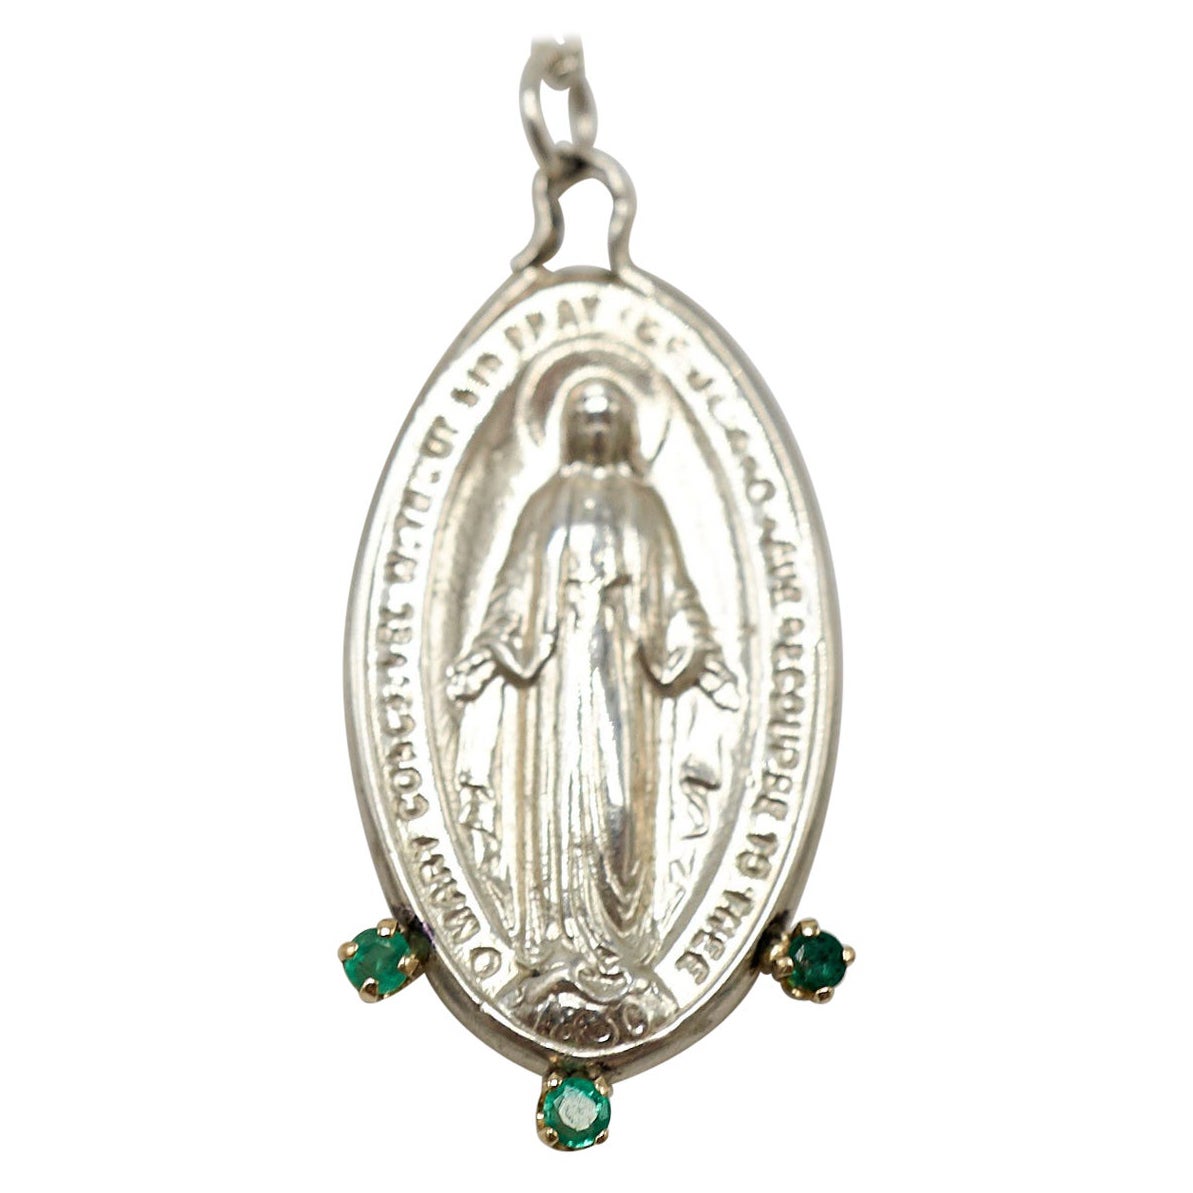 Virgin Mary Medal Oval Pendant Emeralds Silver Chain Necklace J Dauphin